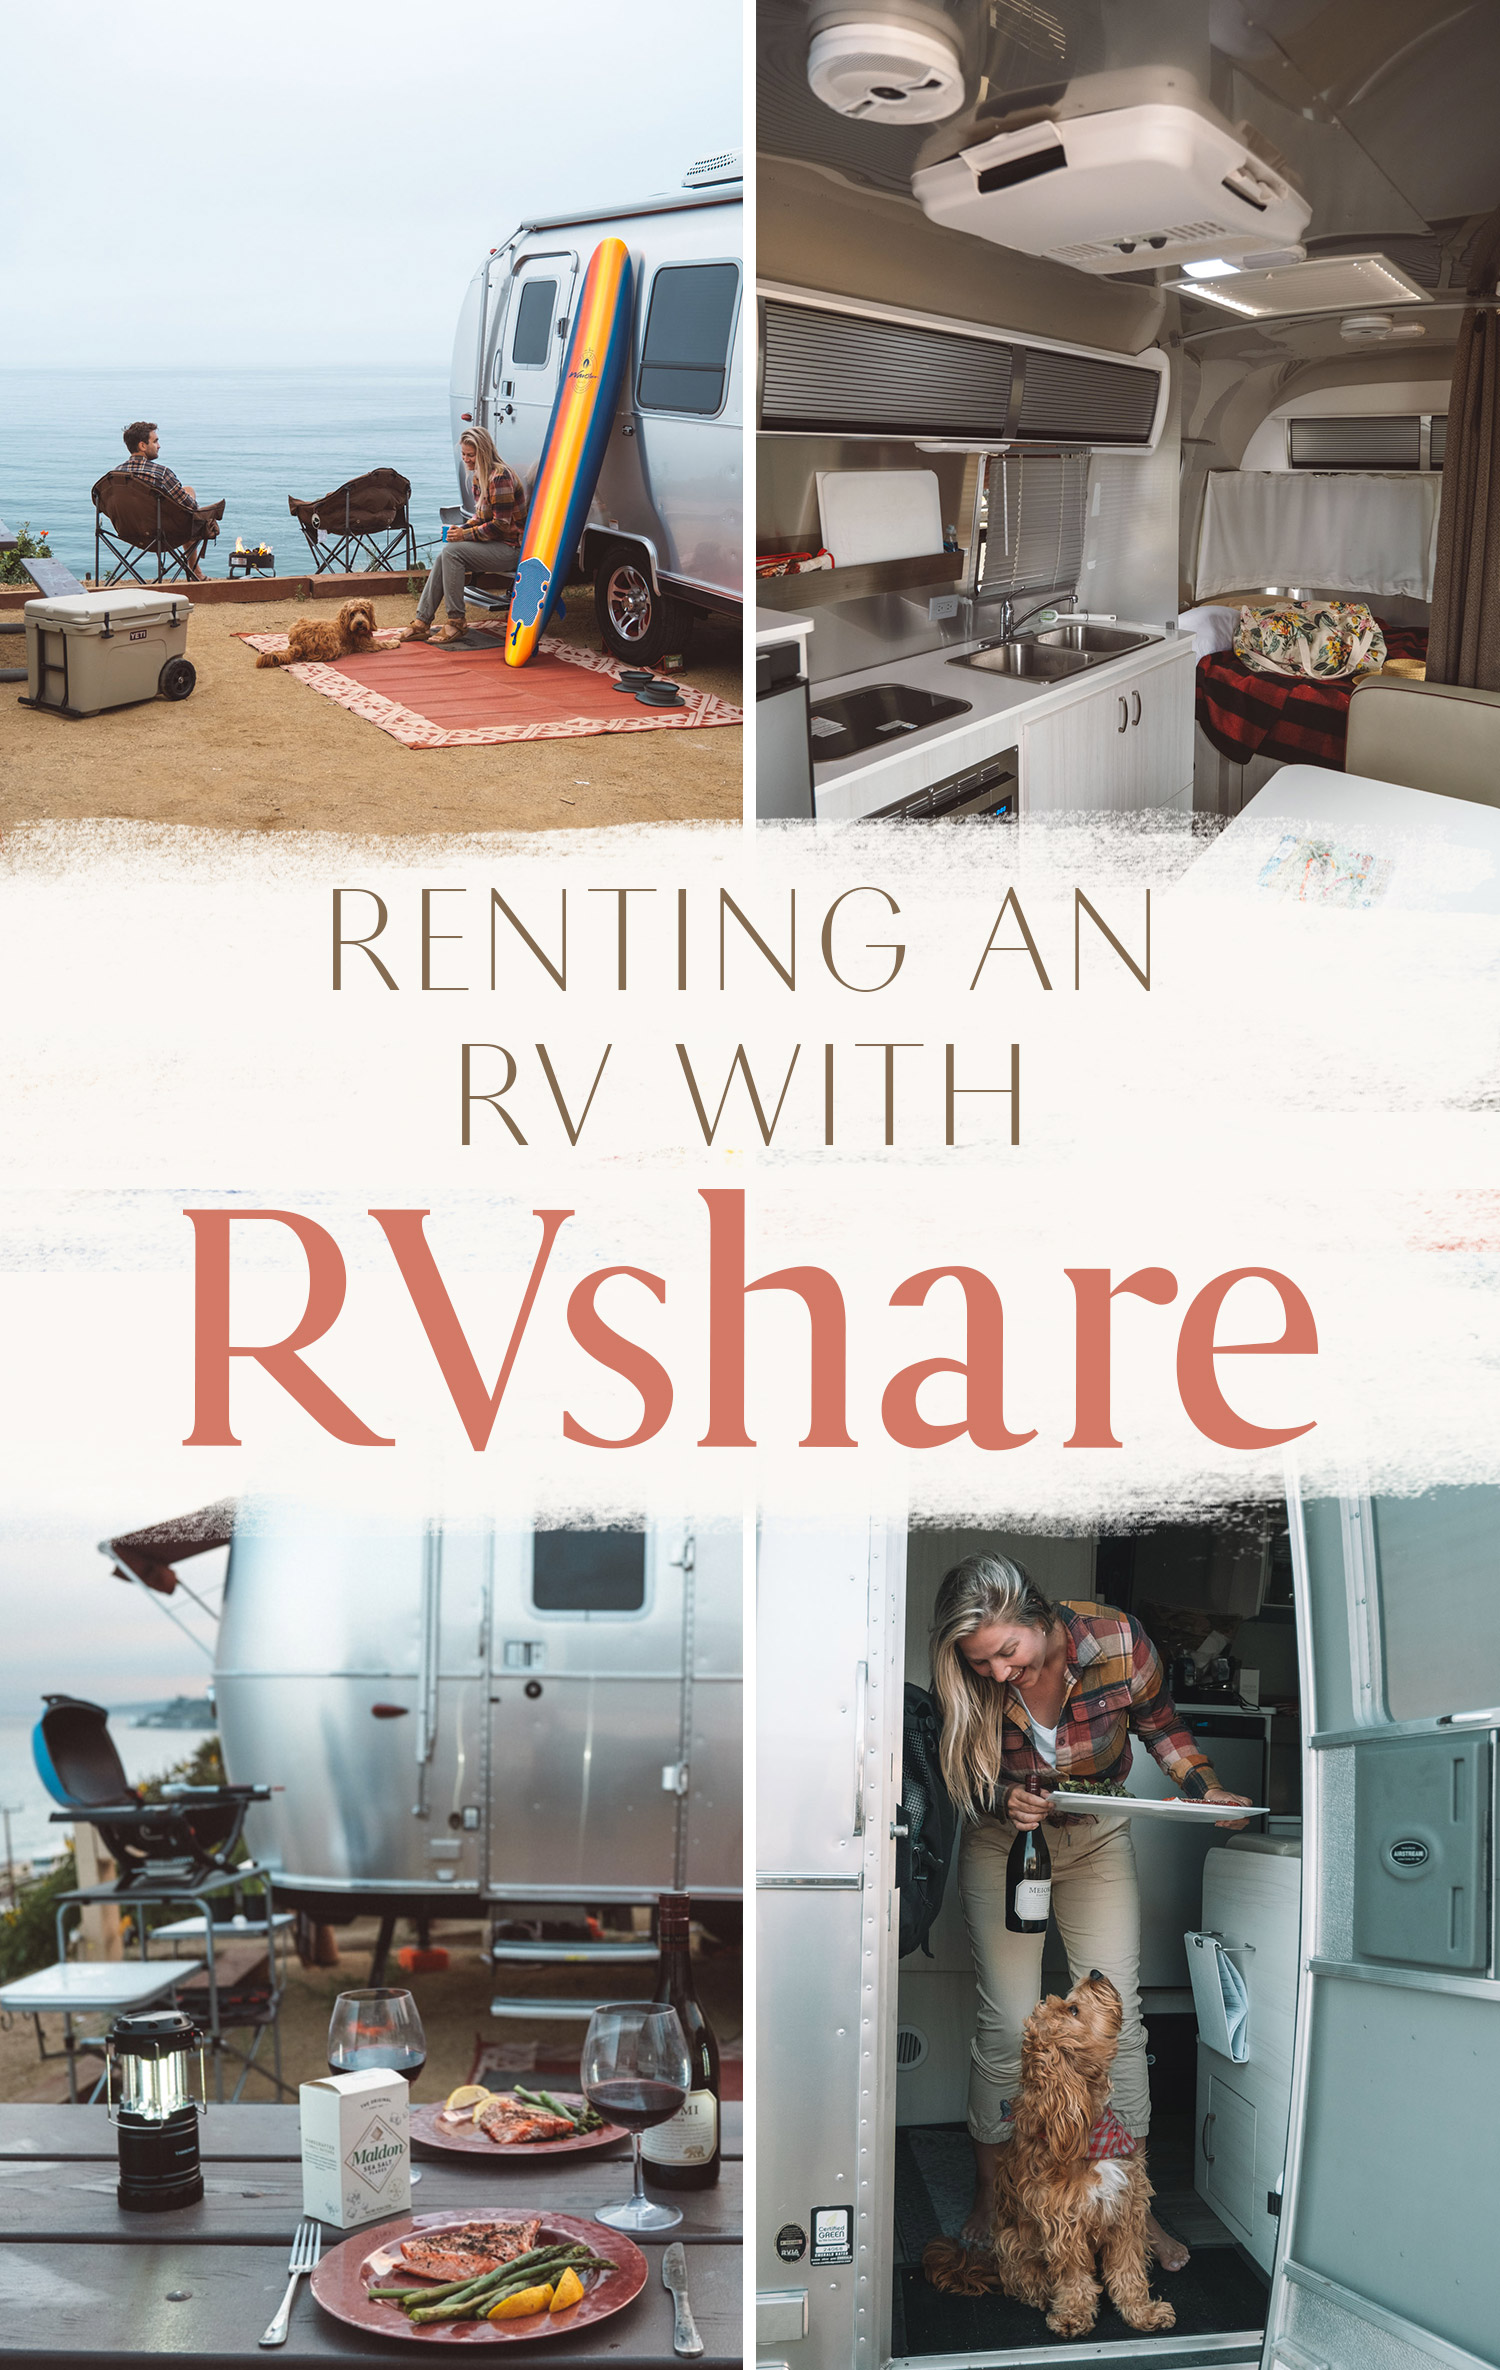 Renting an RV with RVshare